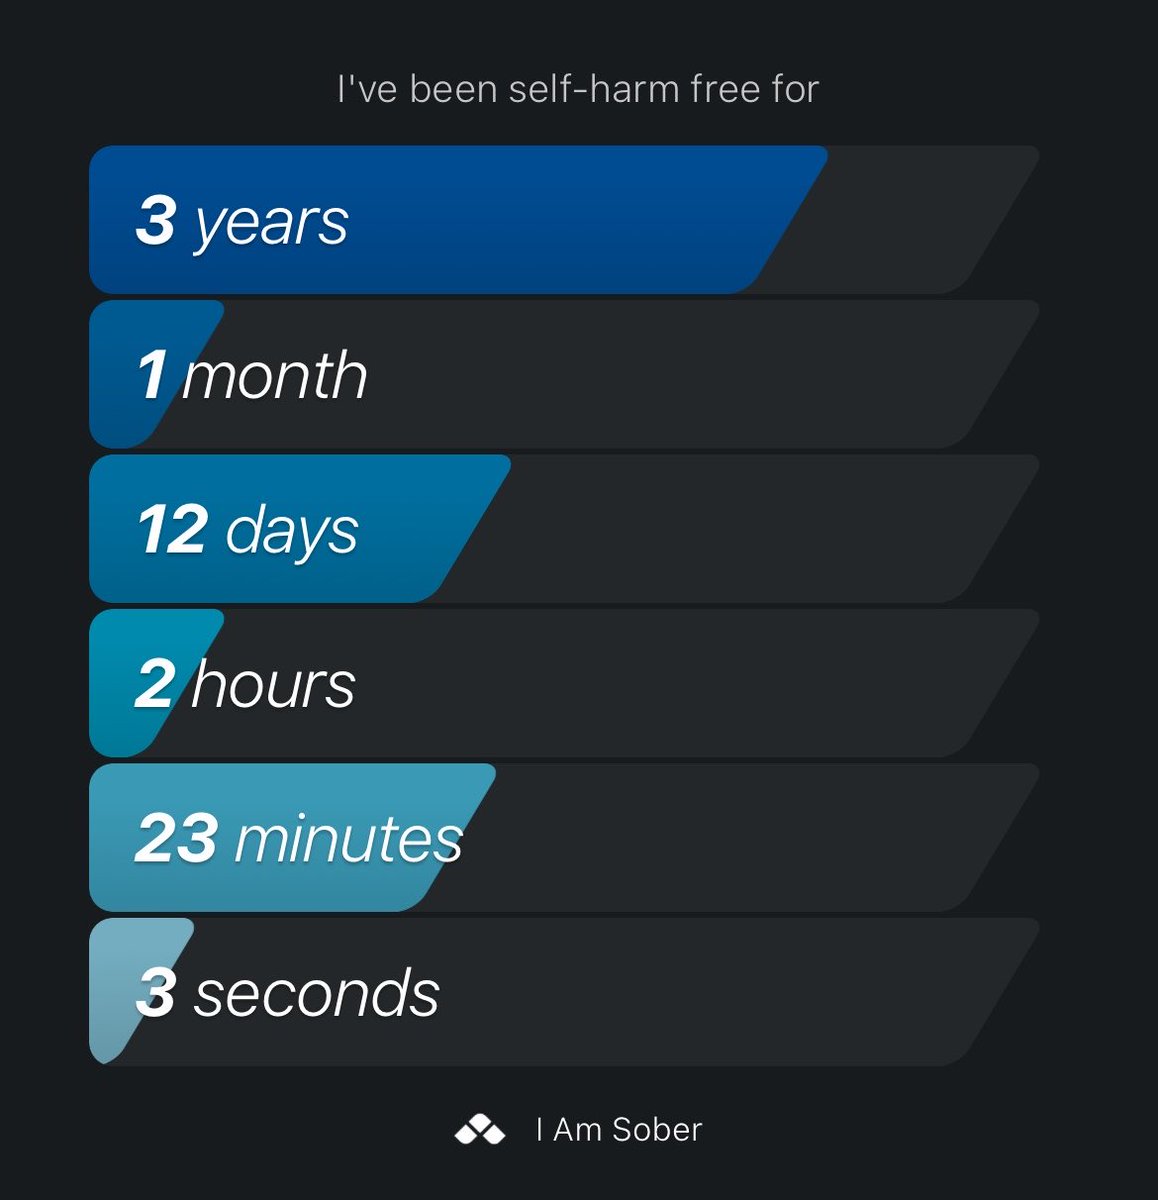 I've been self-harm free for 3 years, 1 month, 12 days #iamsober